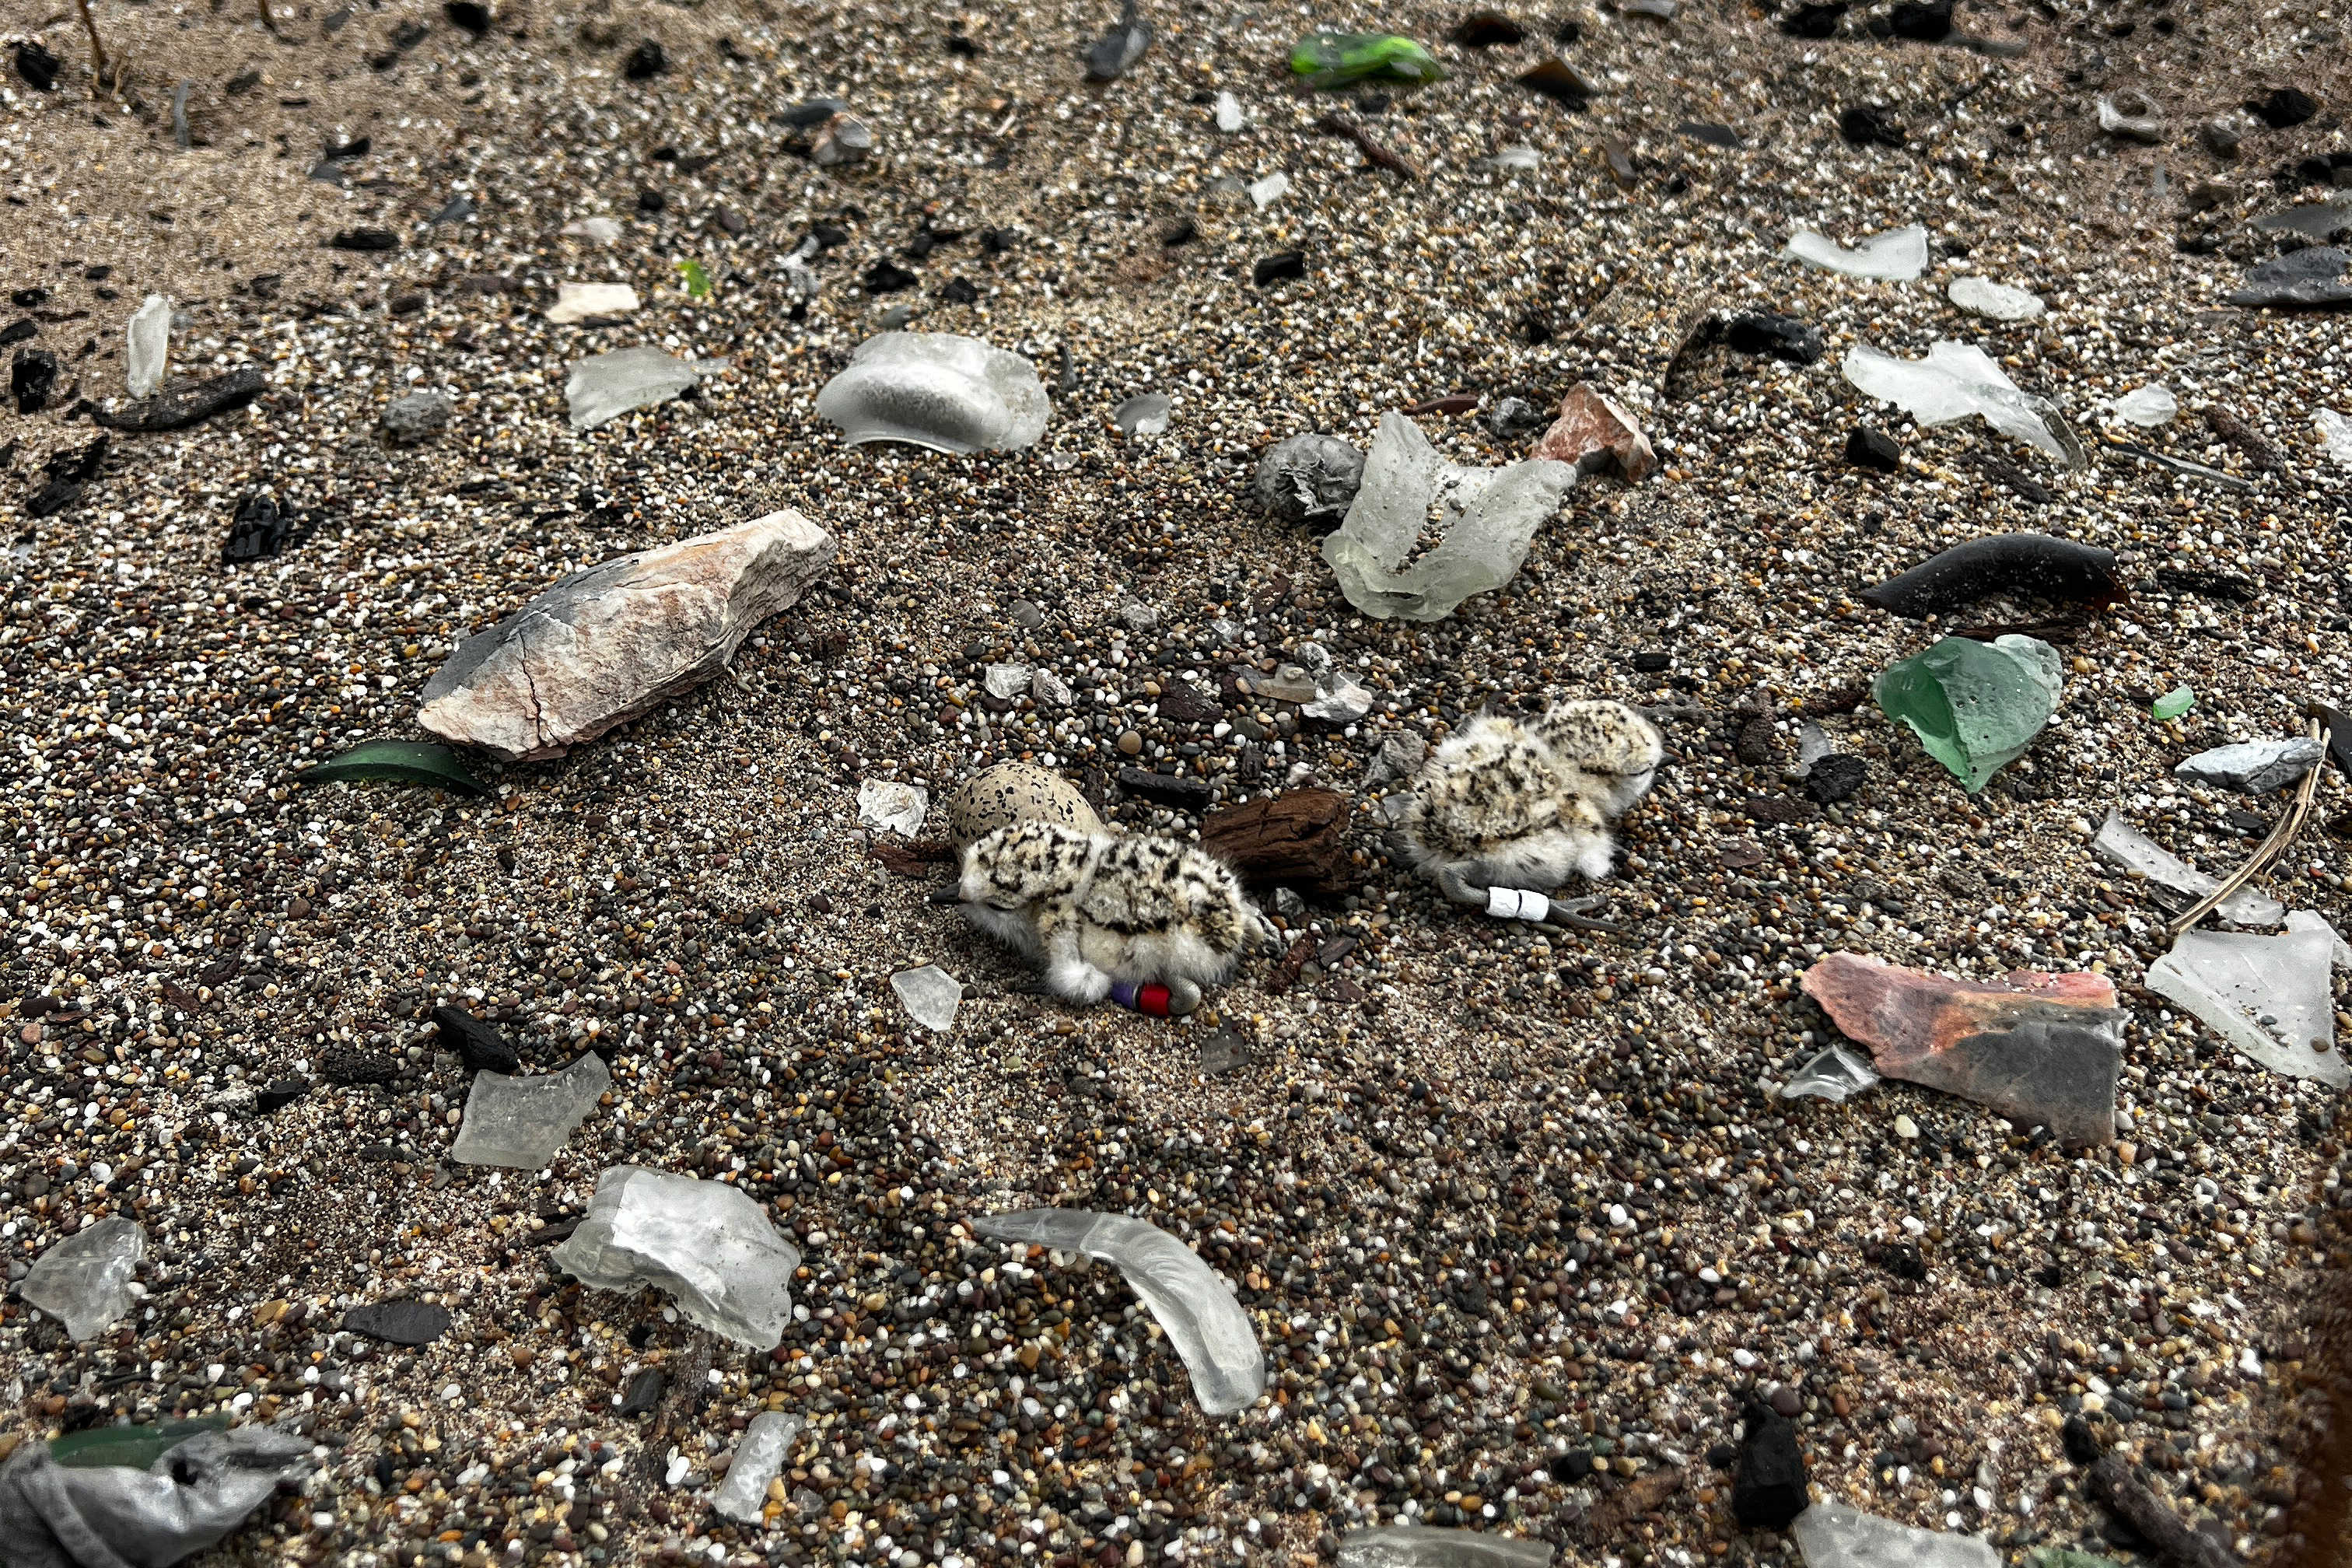 A photo of two small black-speckled, beige-colored chicks with bands on their legs surrounded by shards of glass on a sandy beach.